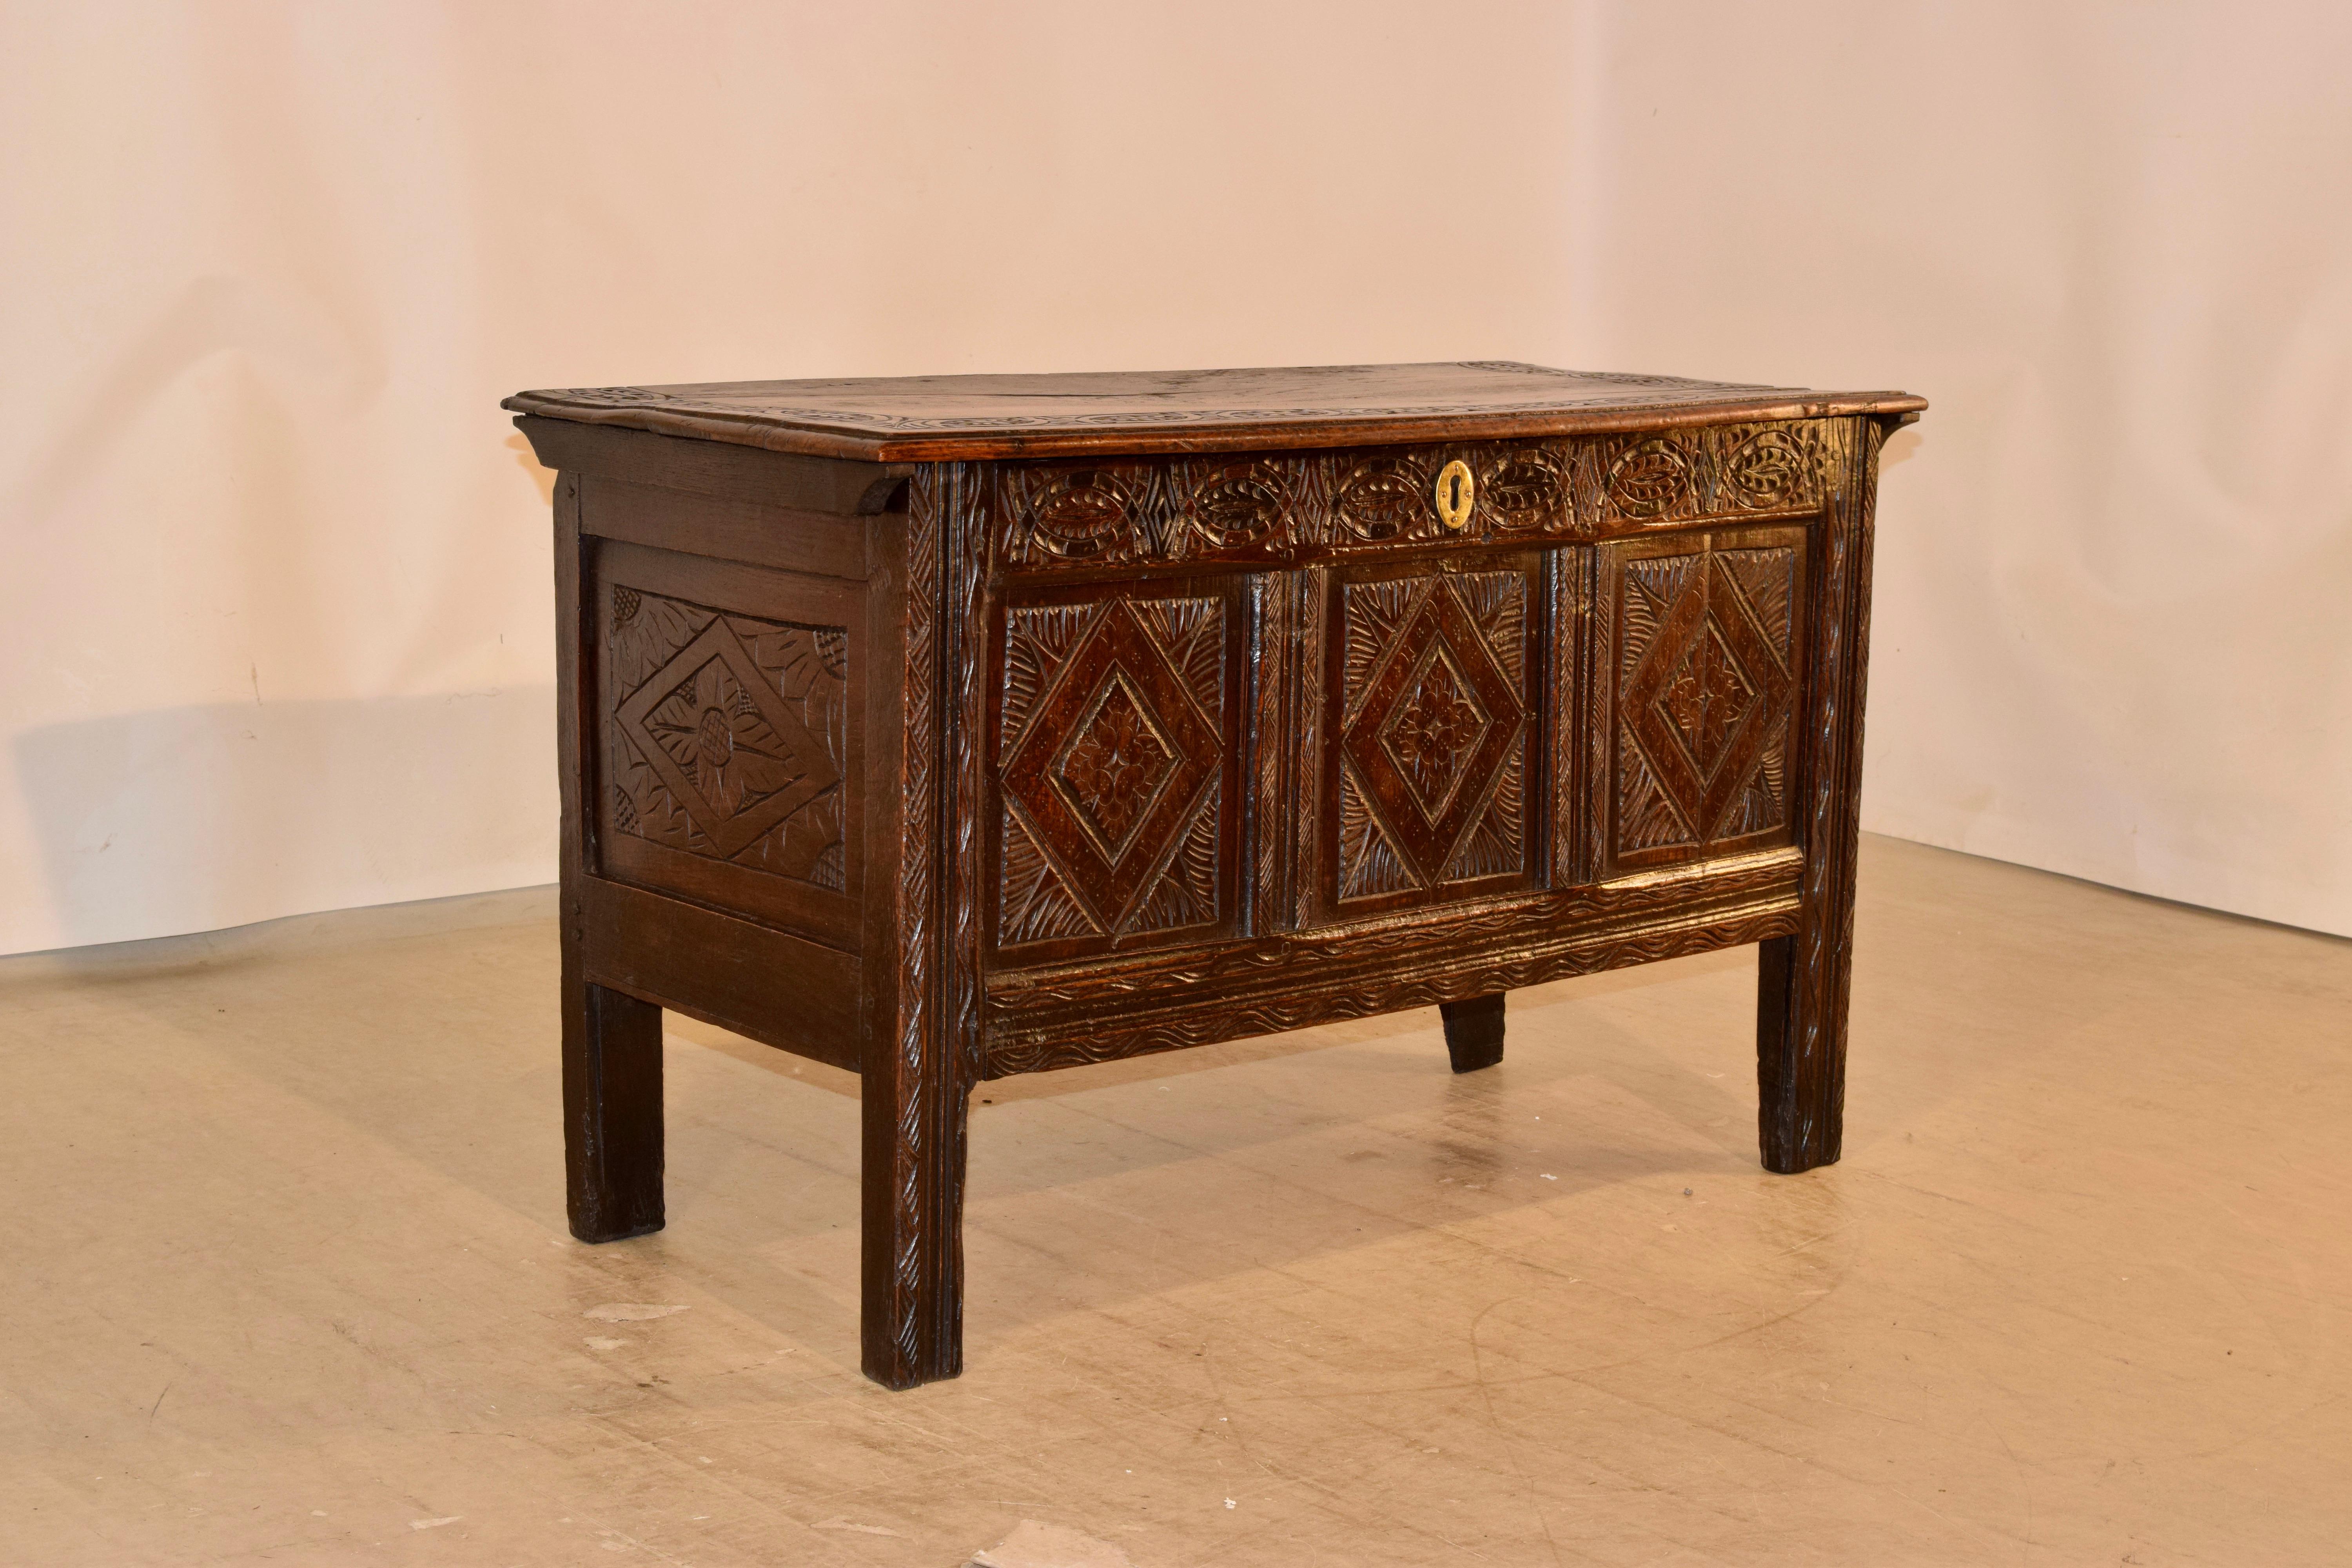 Circa 1690-1710 oak blanket chest from England with wonderful color and carving. The top has a beveled edge and is banded with hand carved lunette designs, over a wonderfully hand carved decorated case. The case has hand paneled and carved sides and